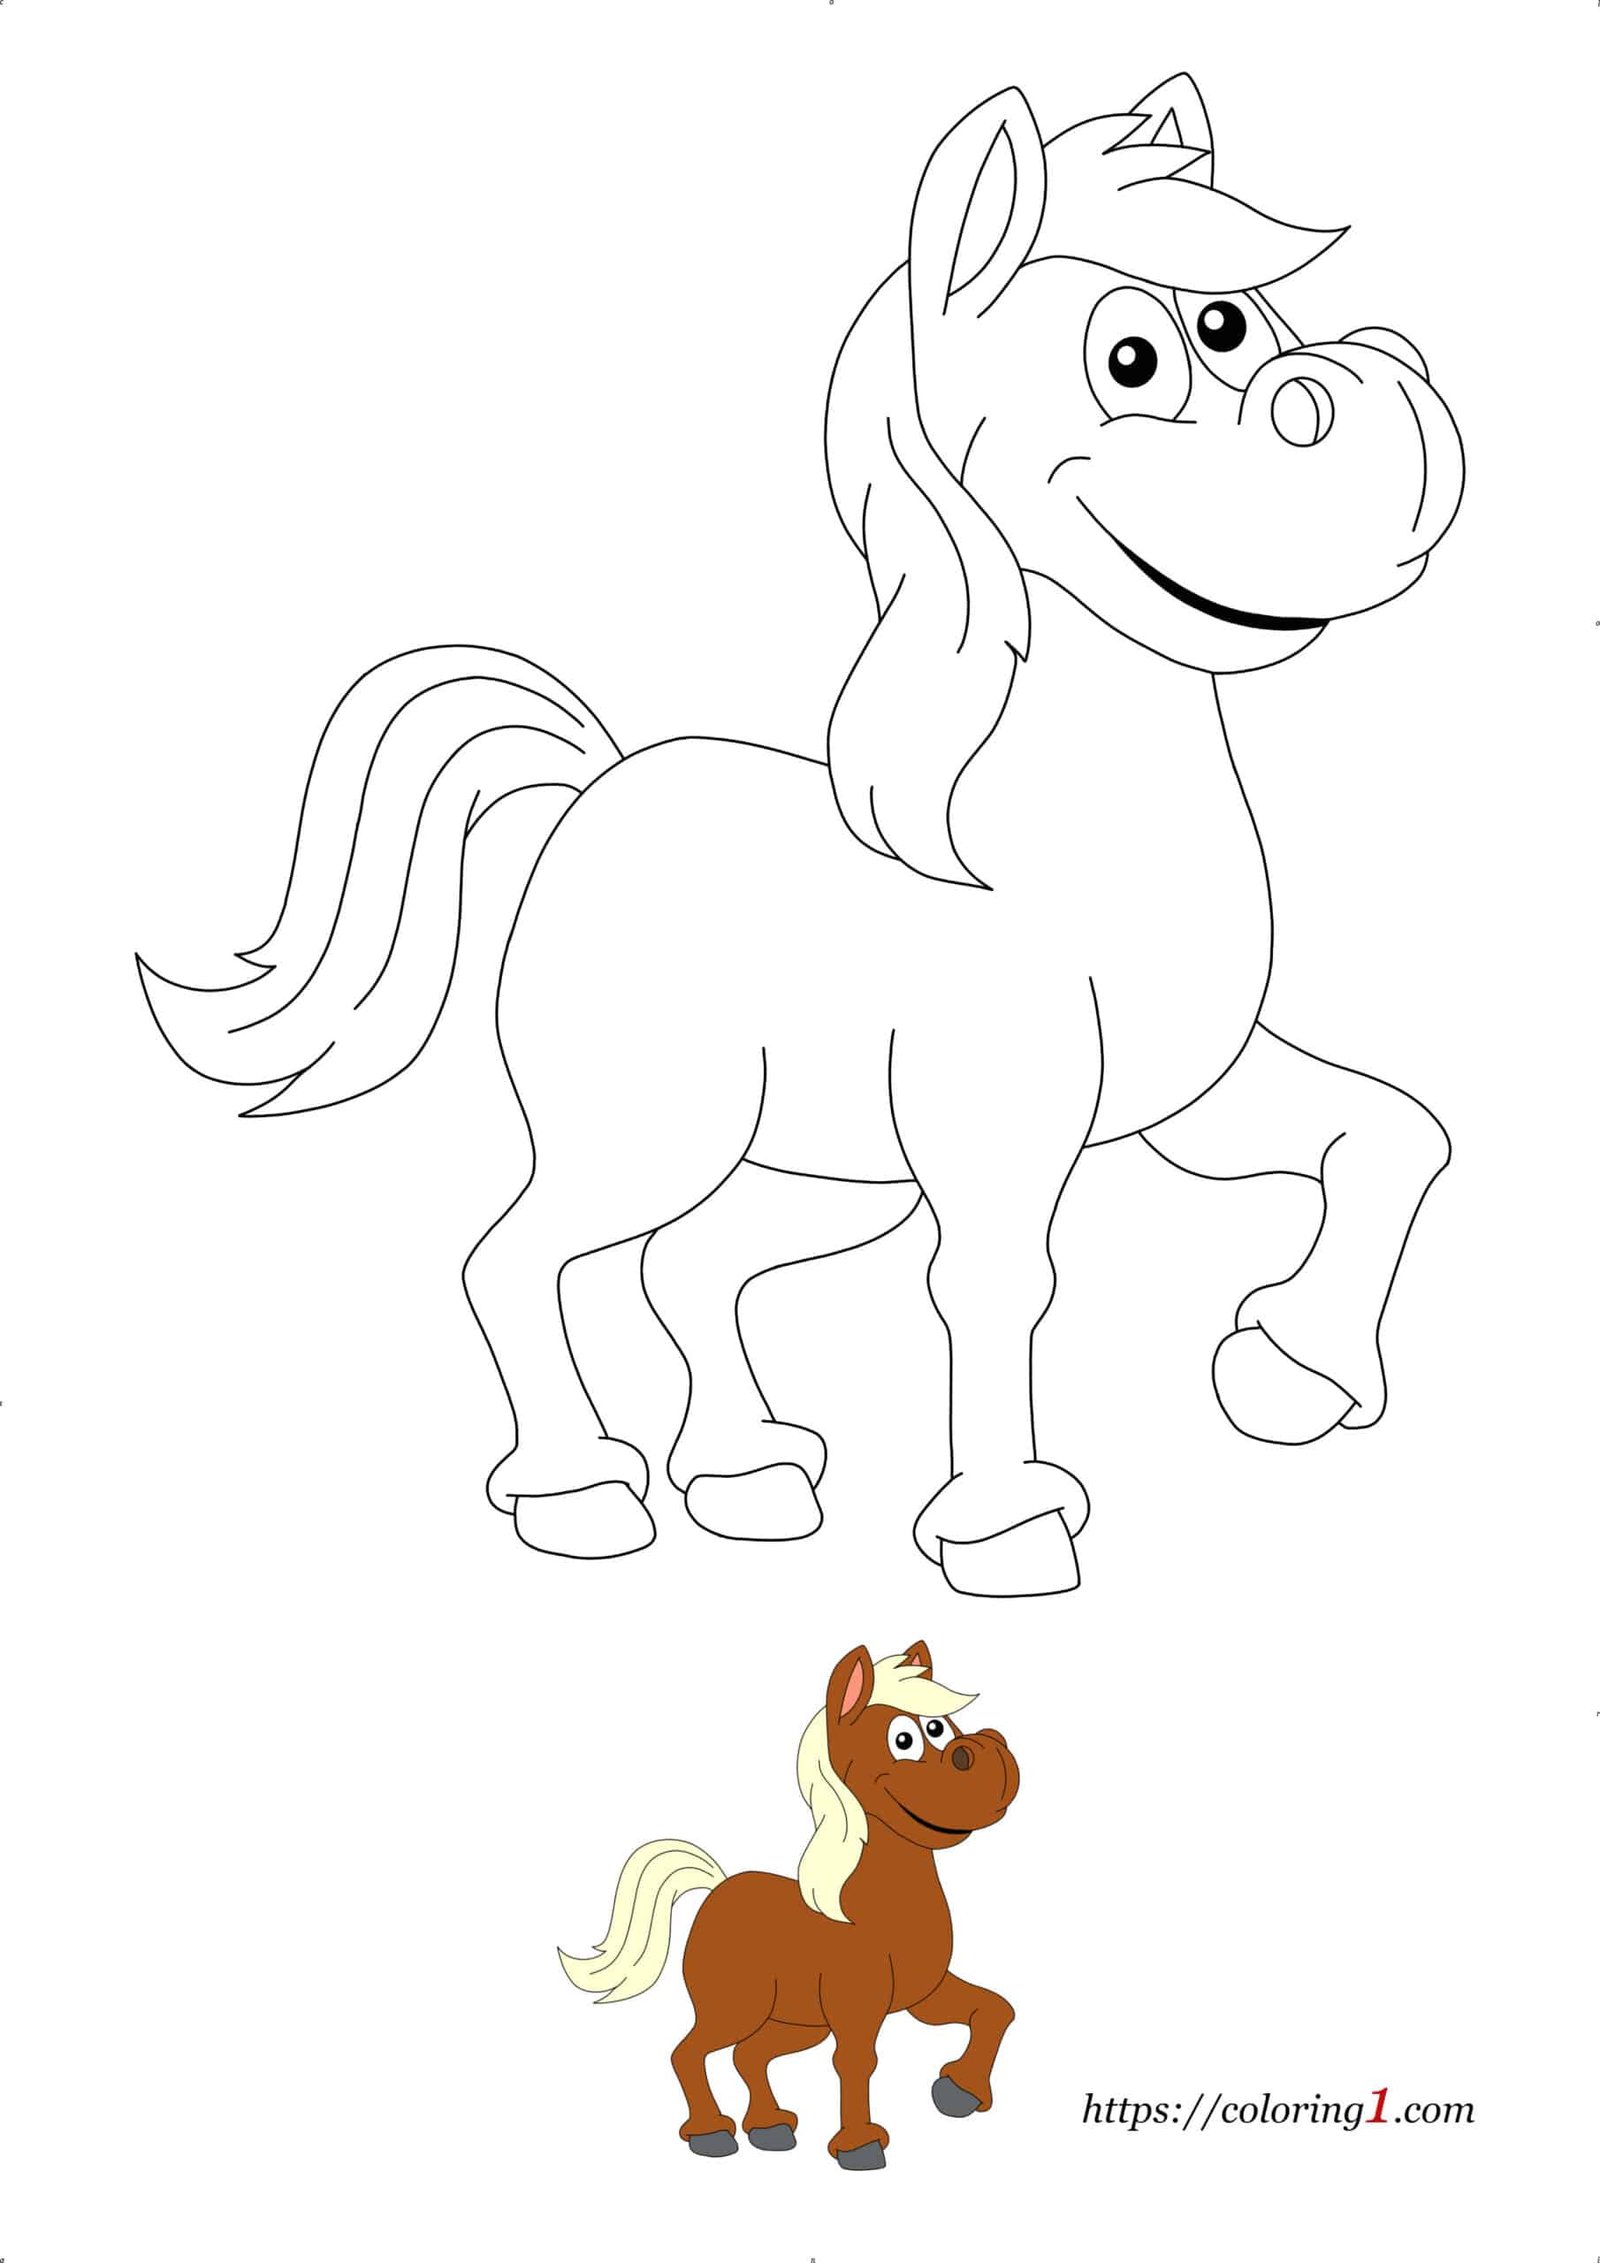 Cartoon Horse easy coloring page with sample to print